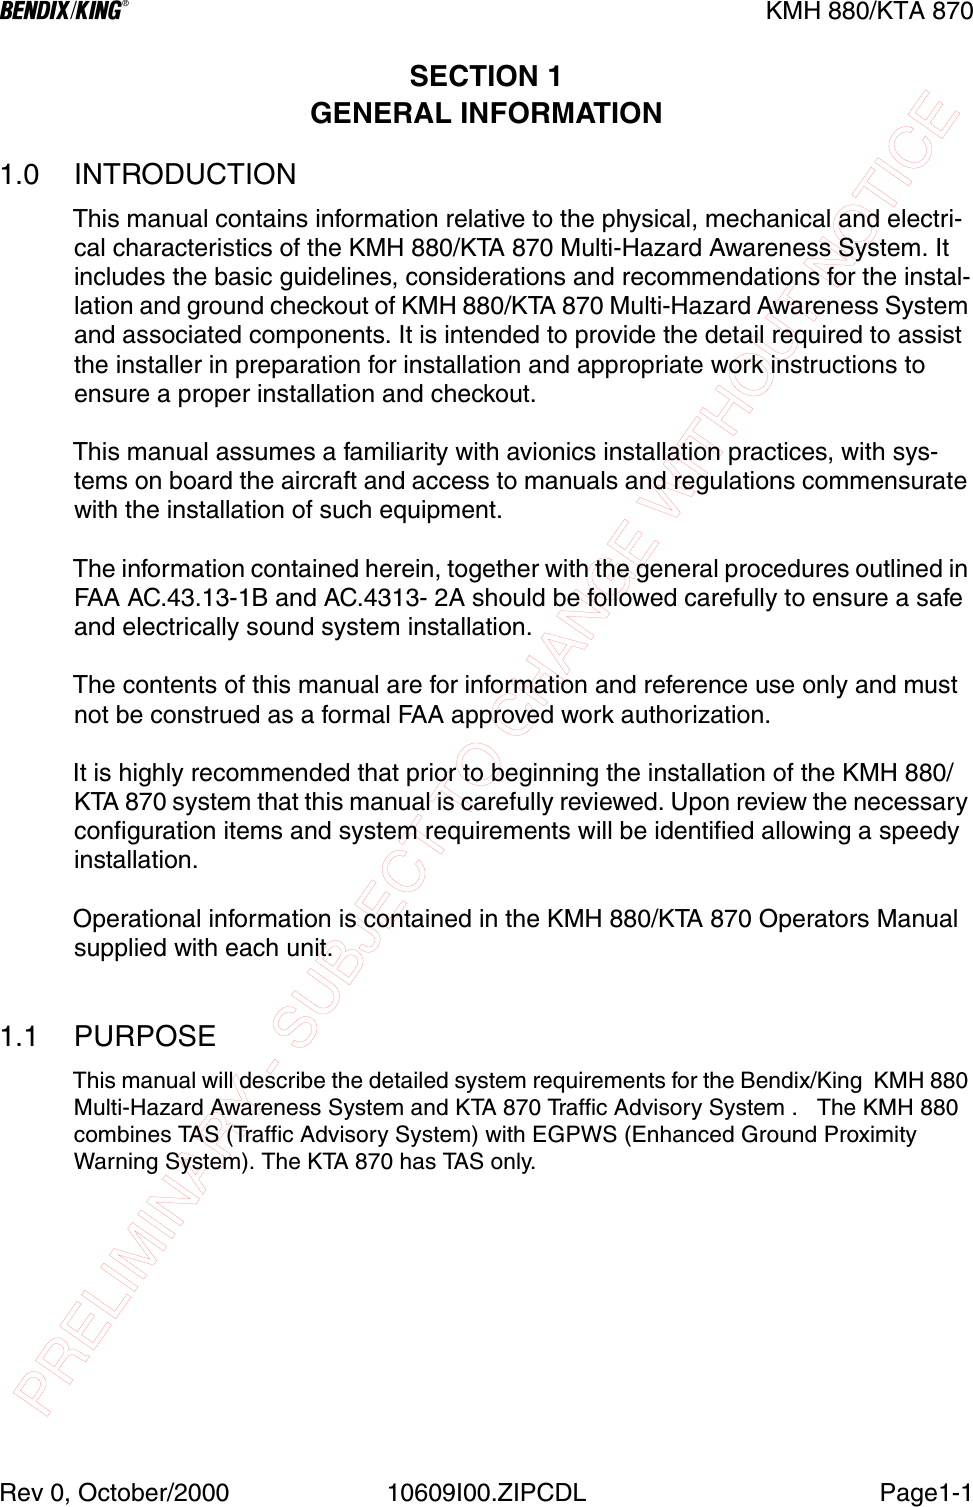 PRELIMINARY - SUBJECT TO CHANGE WITHOUT NOTICEBKMH 880/KTA 870Rev 0, October/2000 10609I00.ZIPCDL Page1-1SECTION 1GENERAL INFORMATION1.0 INTRODUCTIONThis manual contains information relative to the physical, mechanical and electri-cal characteristics of the KMH 880/KTA 870 Multi-Hazard Awareness System. It includes the basic guidelines, considerations and recommendations for the instal-lation and ground checkout of KMH 880/KTA 870 Multi-Hazard Awareness System and associated components. It is intended to provide the detail required to assist the installer in preparation for installation and appropriate work instructions to ensure a proper installation and checkout.This manual assumes a familiarity with avionics installation practices, with sys-tems on board the aircraft and access to manuals and regulations commensurate with the installation of such equipment.The information contained herein, together with the general procedures outlined in FAA AC.43.13-1B and AC.4313- 2A should be followed carefully to ensure a safe and electrically sound system installation.The contents of this manual are for information and reference use only and must not be construed as a formal FAA approved work authorization.It is highly recommended that prior to beginning the installation of the KMH 880/KTA 870 system that this manual is carefully reviewed. Upon review the necessary configuration items and system requirements will be identified allowing a speedy installation.Operational information is contained in the KMH 880/KTA 870 Operators Manual supplied with each unit.1.1 PURPOSEThis manual will describe the detailed system requirements for the Bendix/King  KMH 880 Multi-Hazard Awareness System and KTA 870 Traffic Advisory System .   The KMH 880 combines TAS (Traffic Advisory System) with EGPWS (Enhanced Ground Proximity Warning System). The KTA 870 has TAS only.